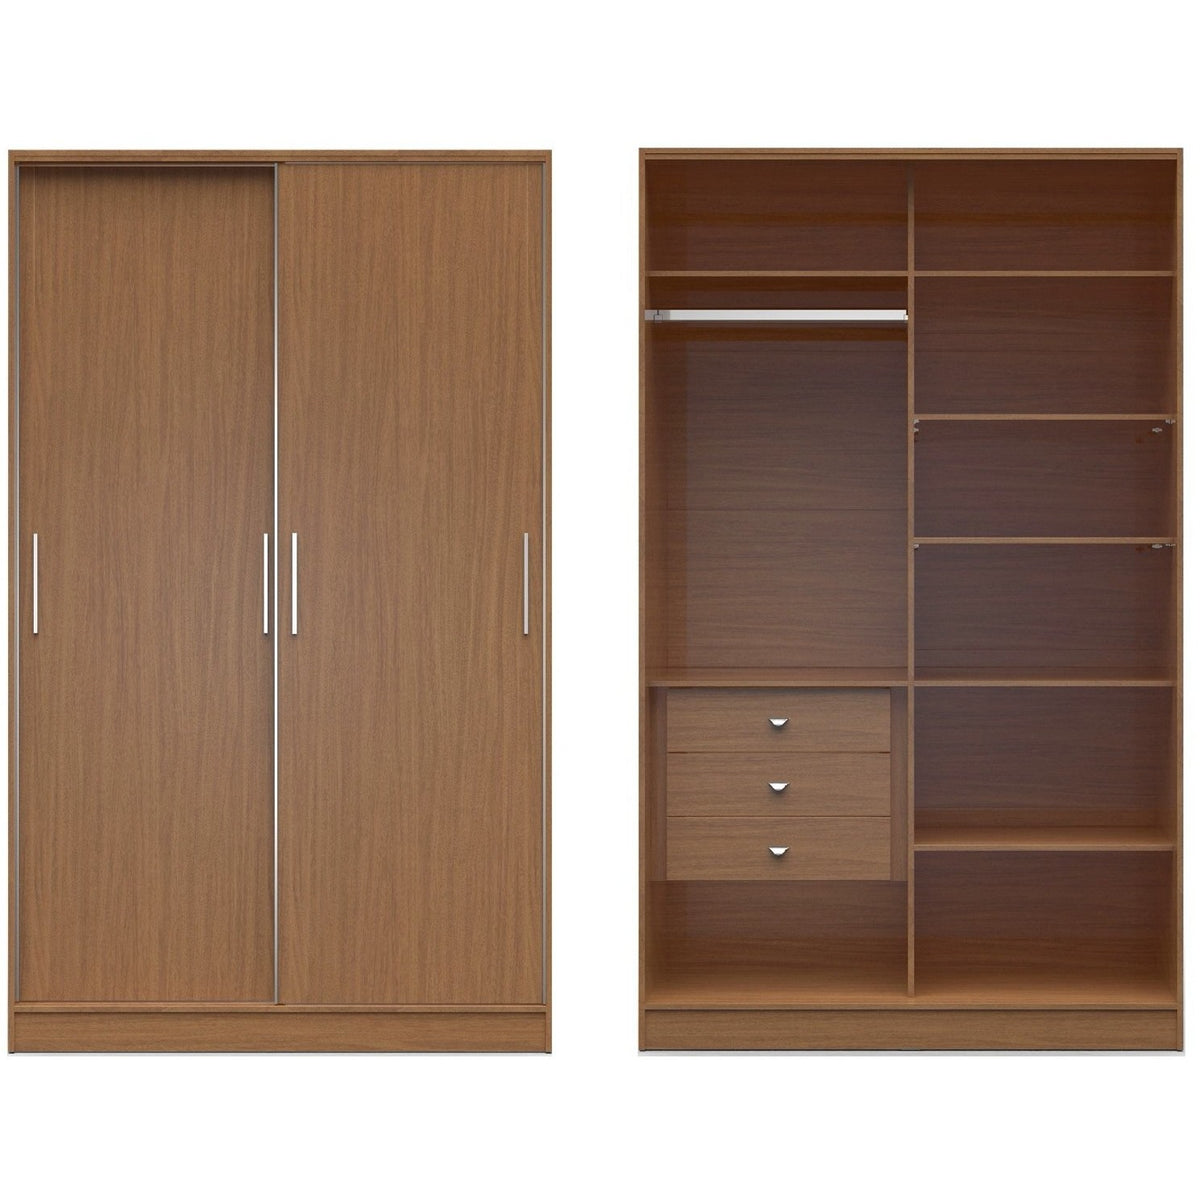 Manhattan Comfort Chelsea 1.0 - 54.33 inch Wide Full Wardrobe with 3 Drawers and 2 Sliding Doors in Maple Cream-Minimal & Modern